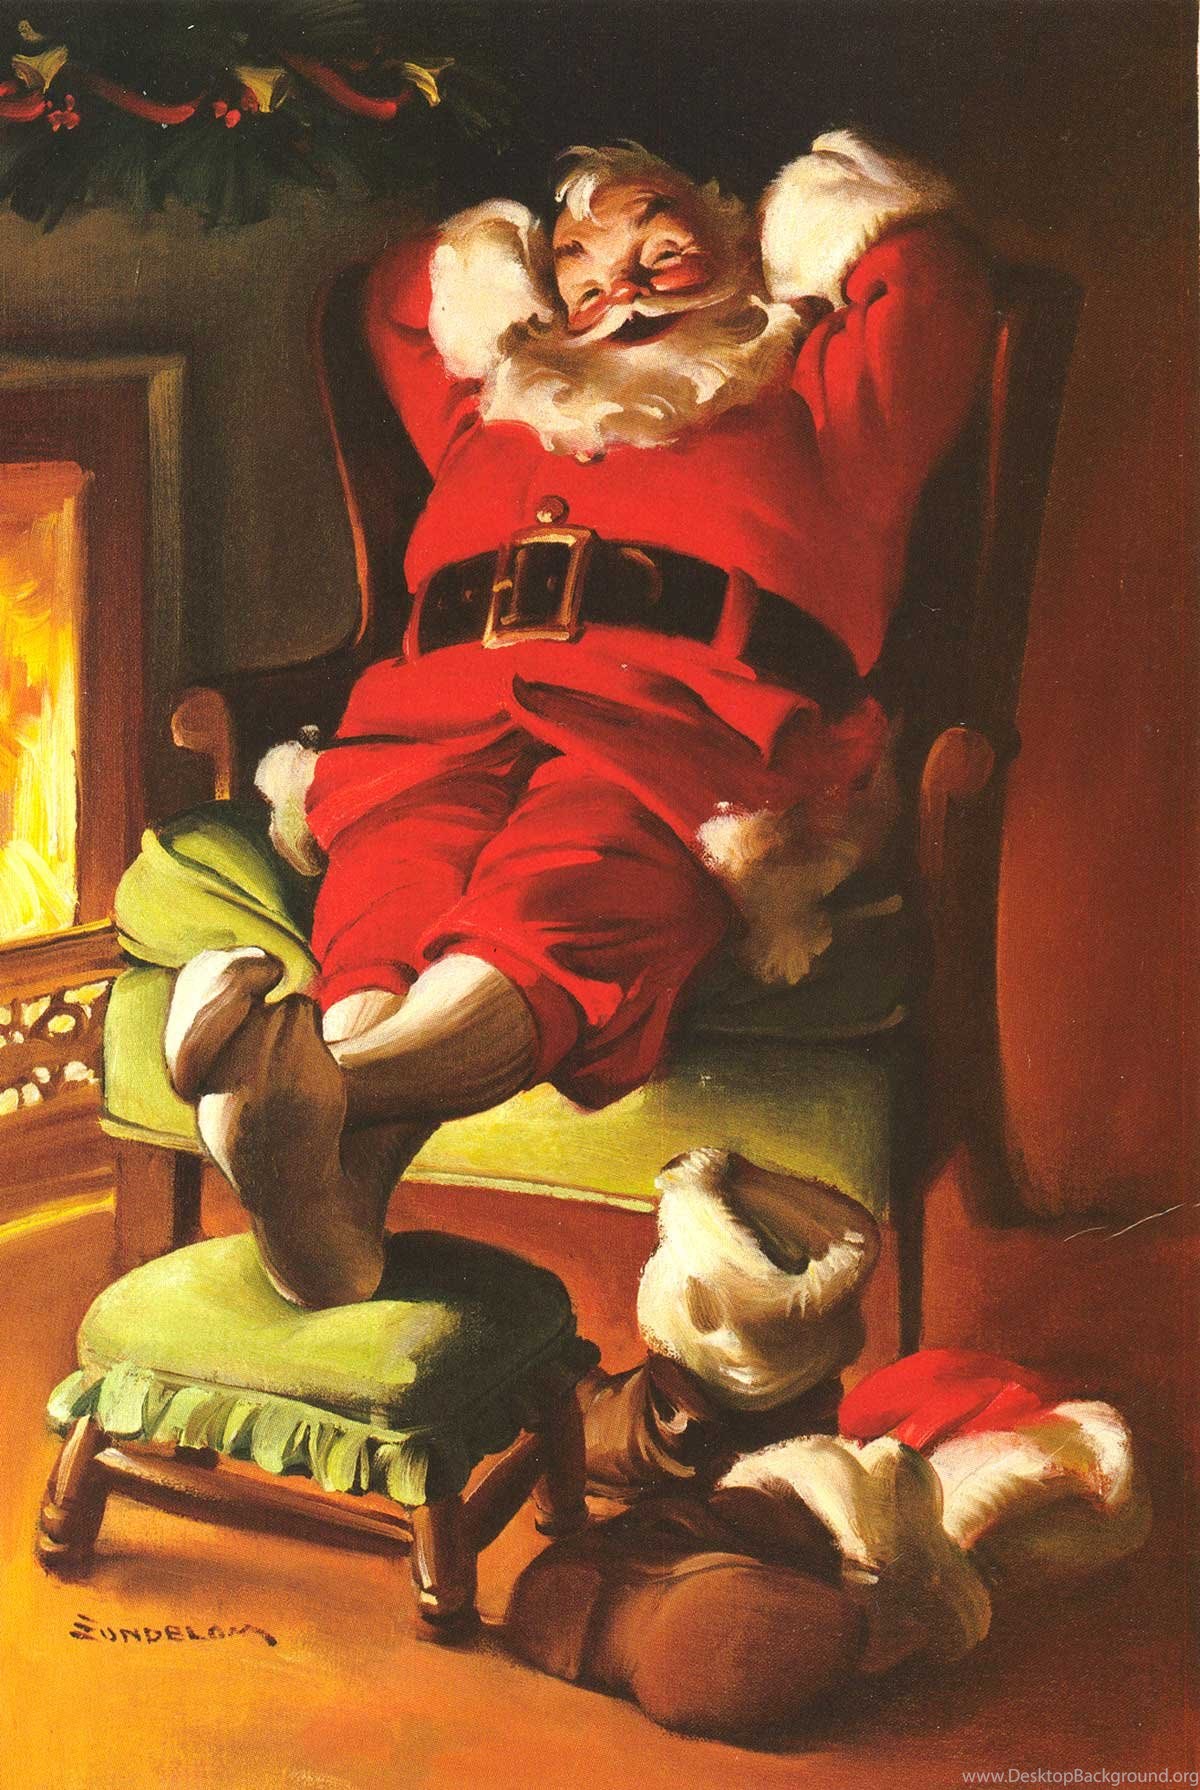 668946_norman rockwell christmas images wallpapers hd fine_1200x1790_h